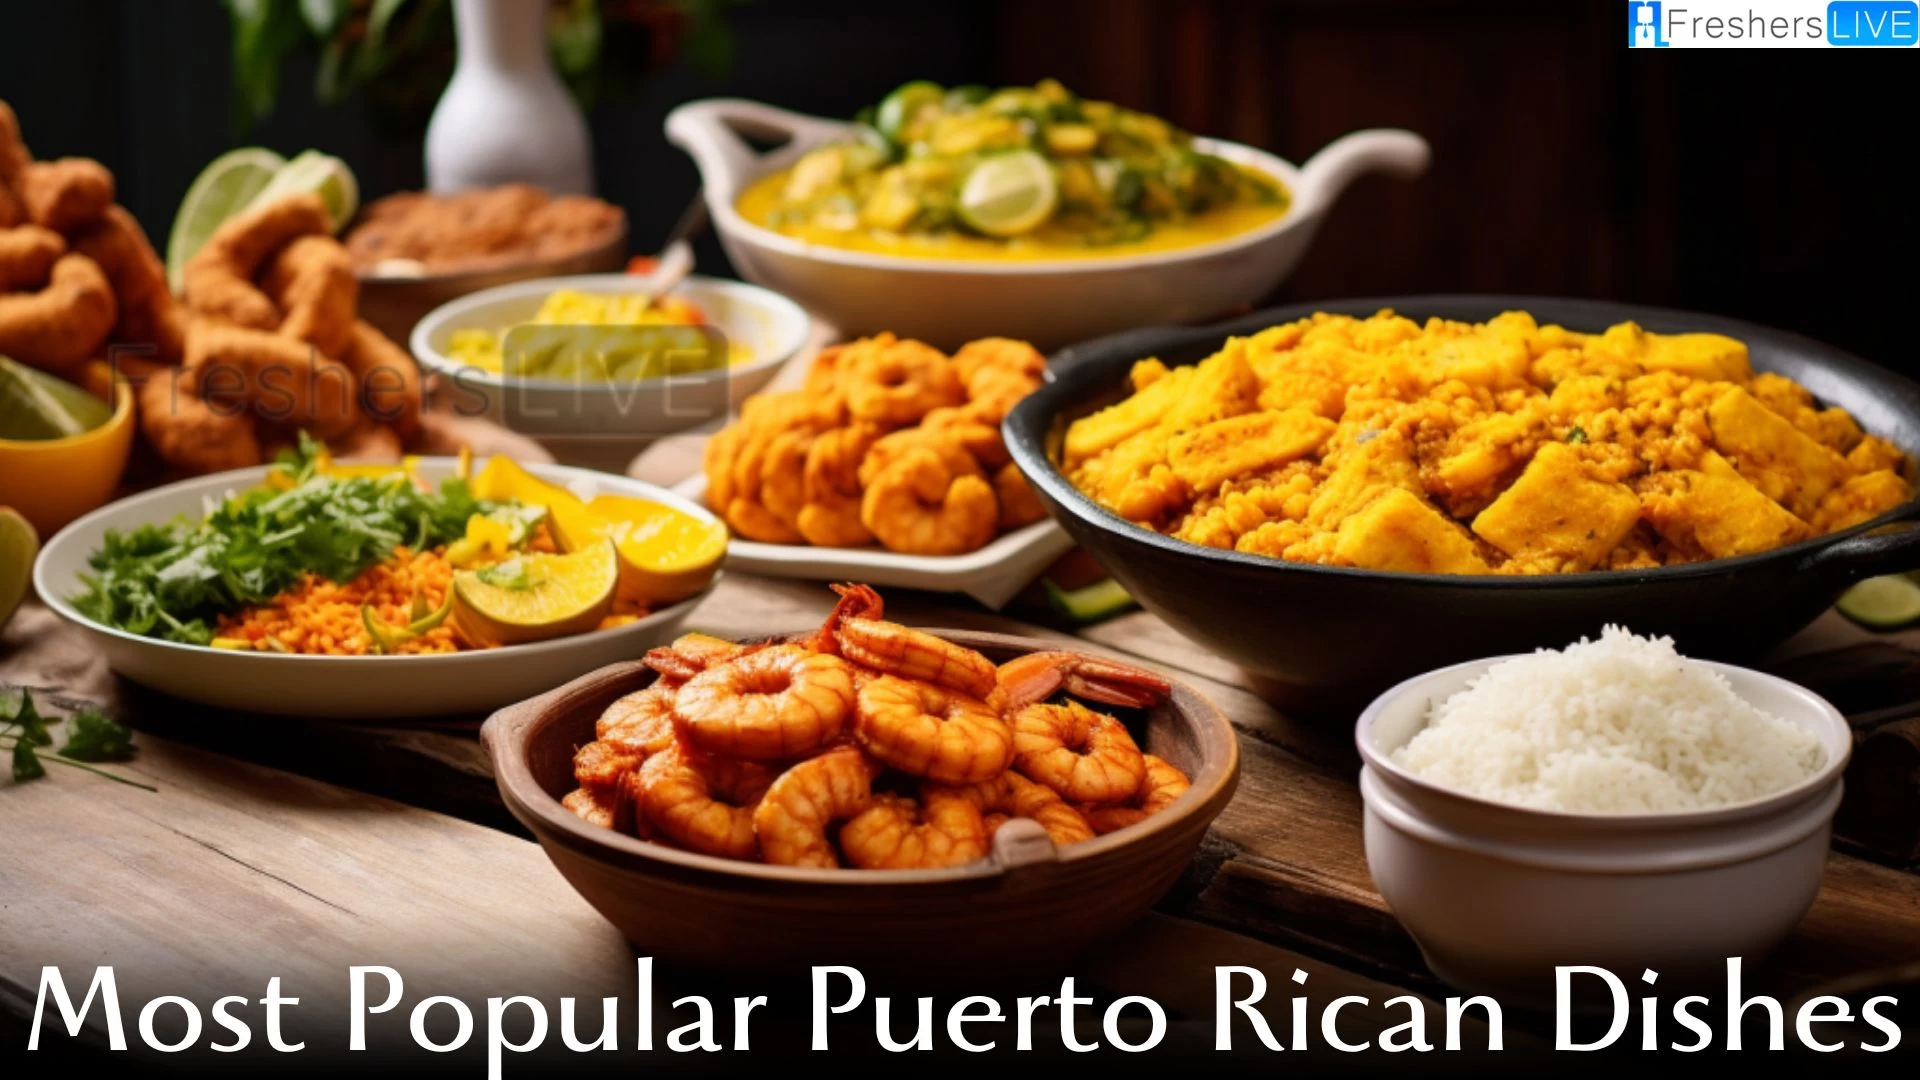 Most Popular Puerto Rican Dishes - Top 10 Delicious Dishes